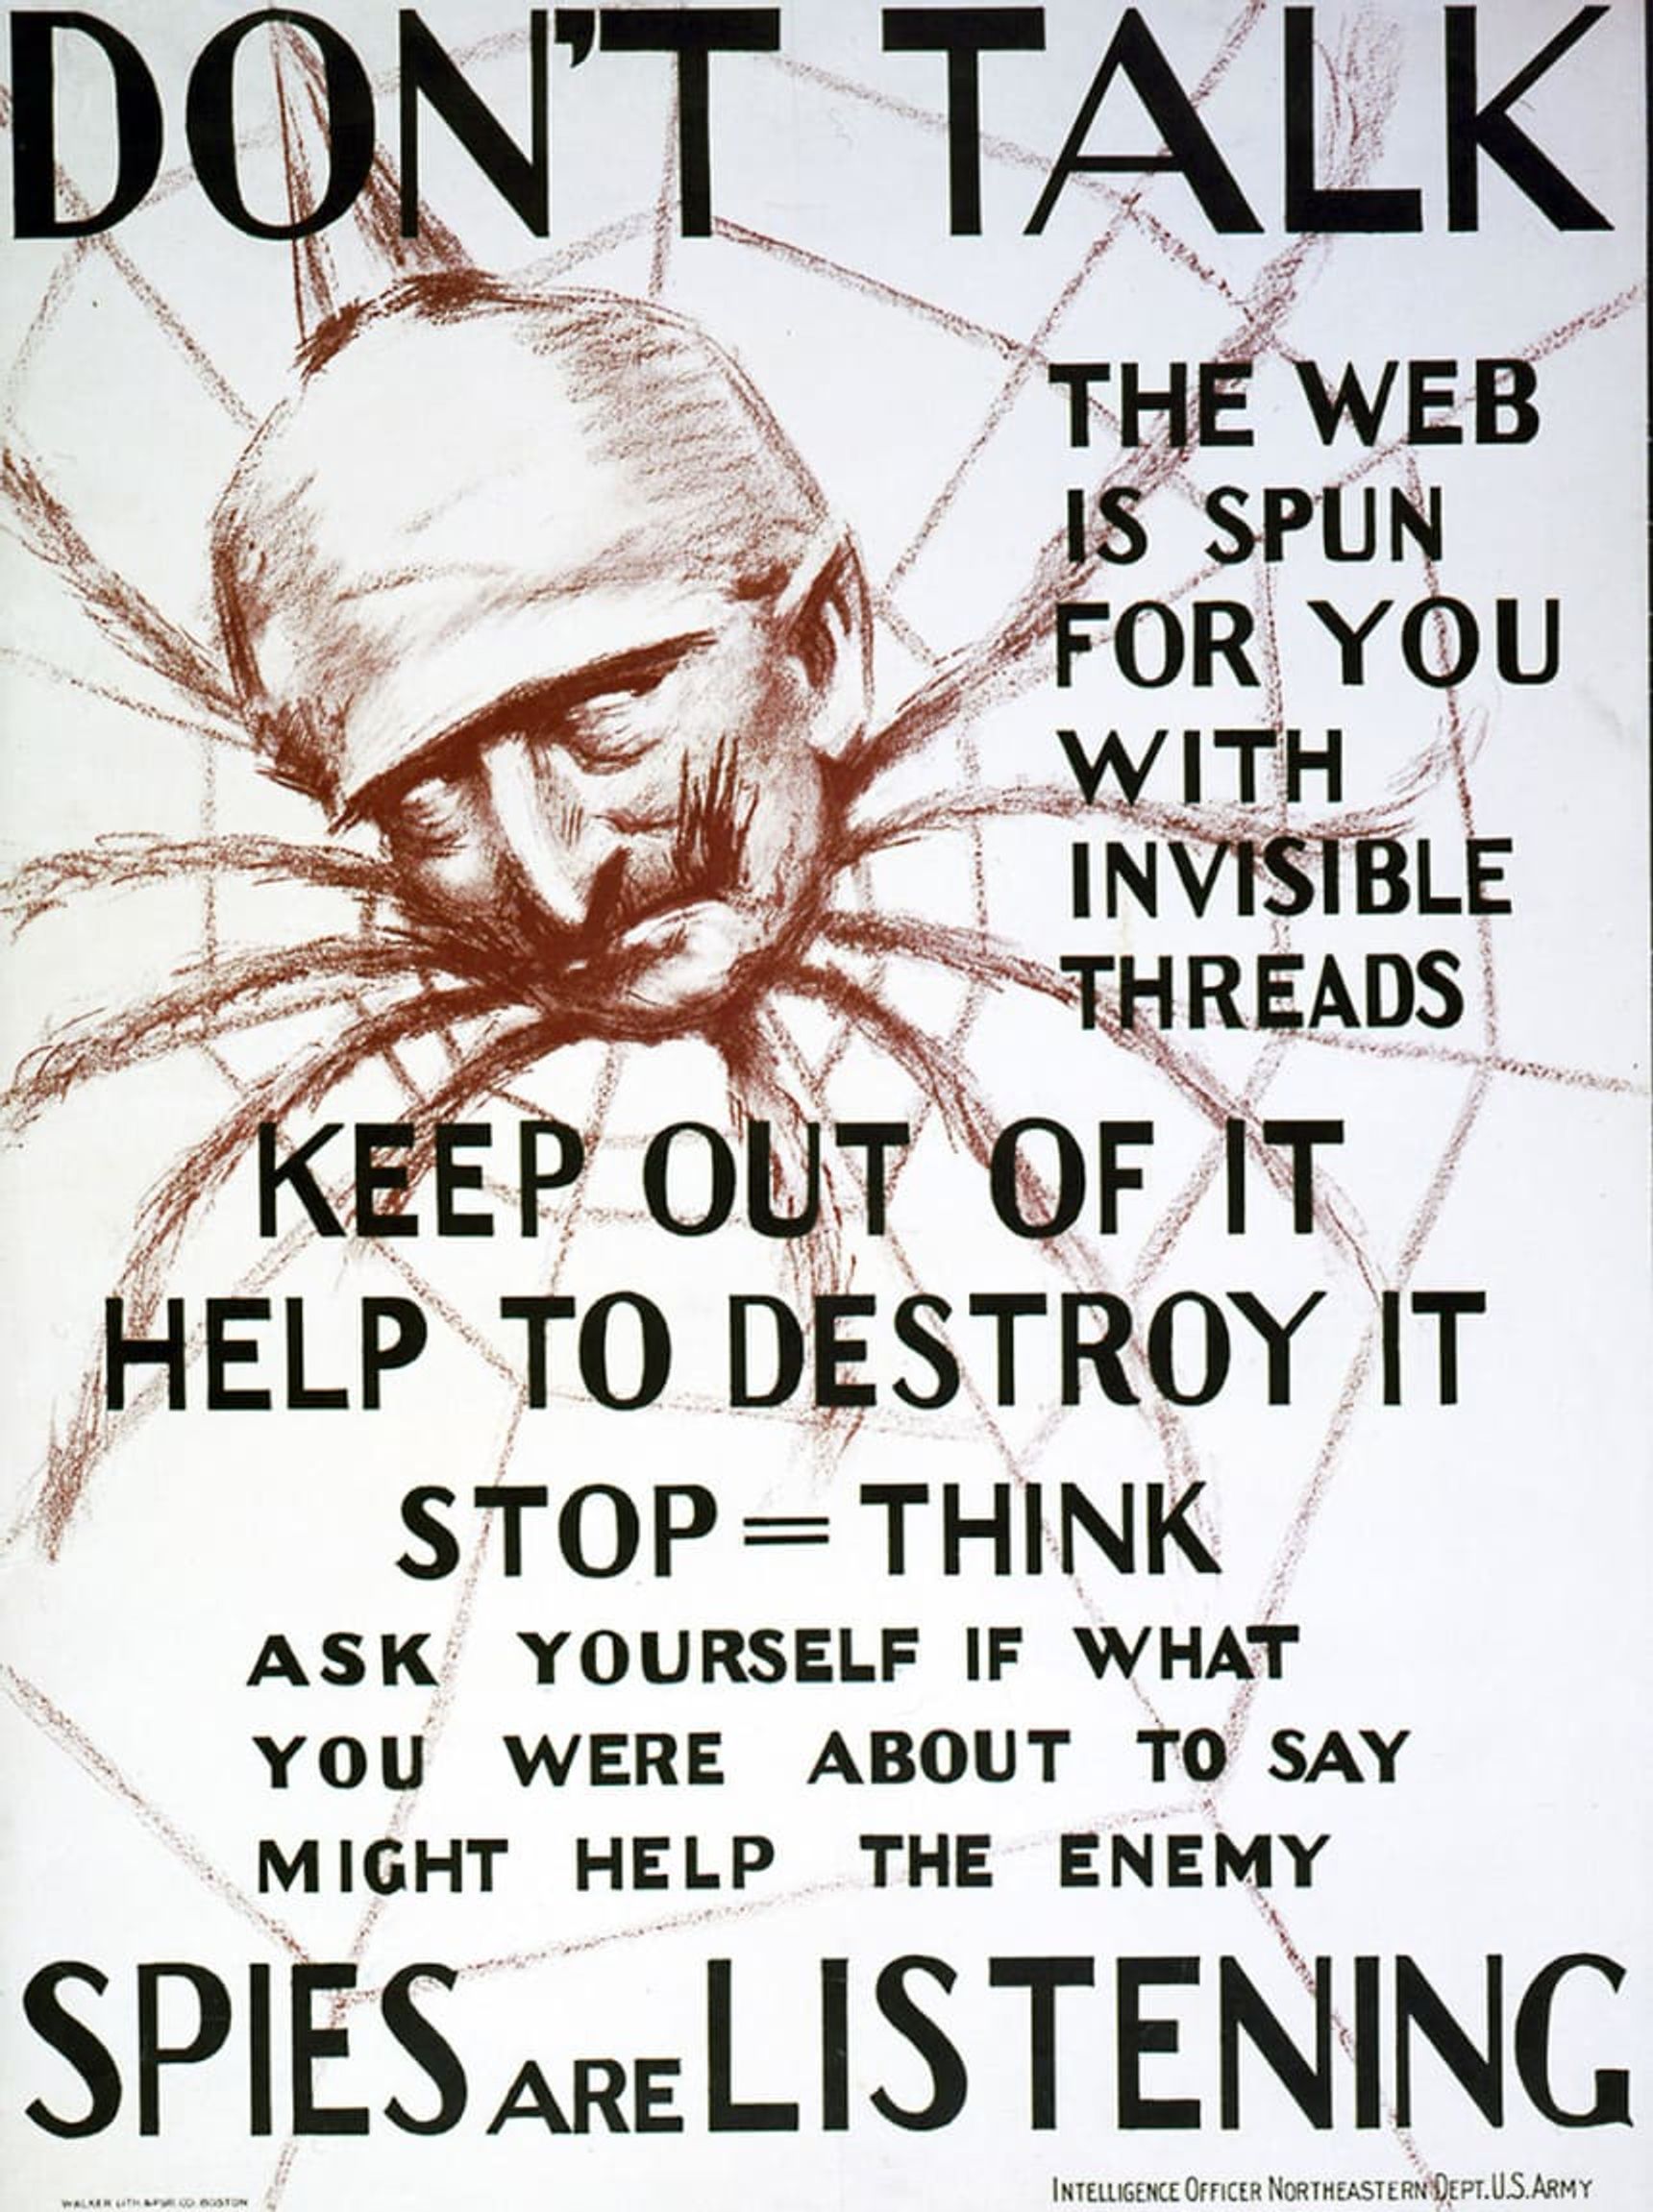 A WWI-era propagandist poster of the US intelligence, depicting Kaiser Wilhelm II as a spider